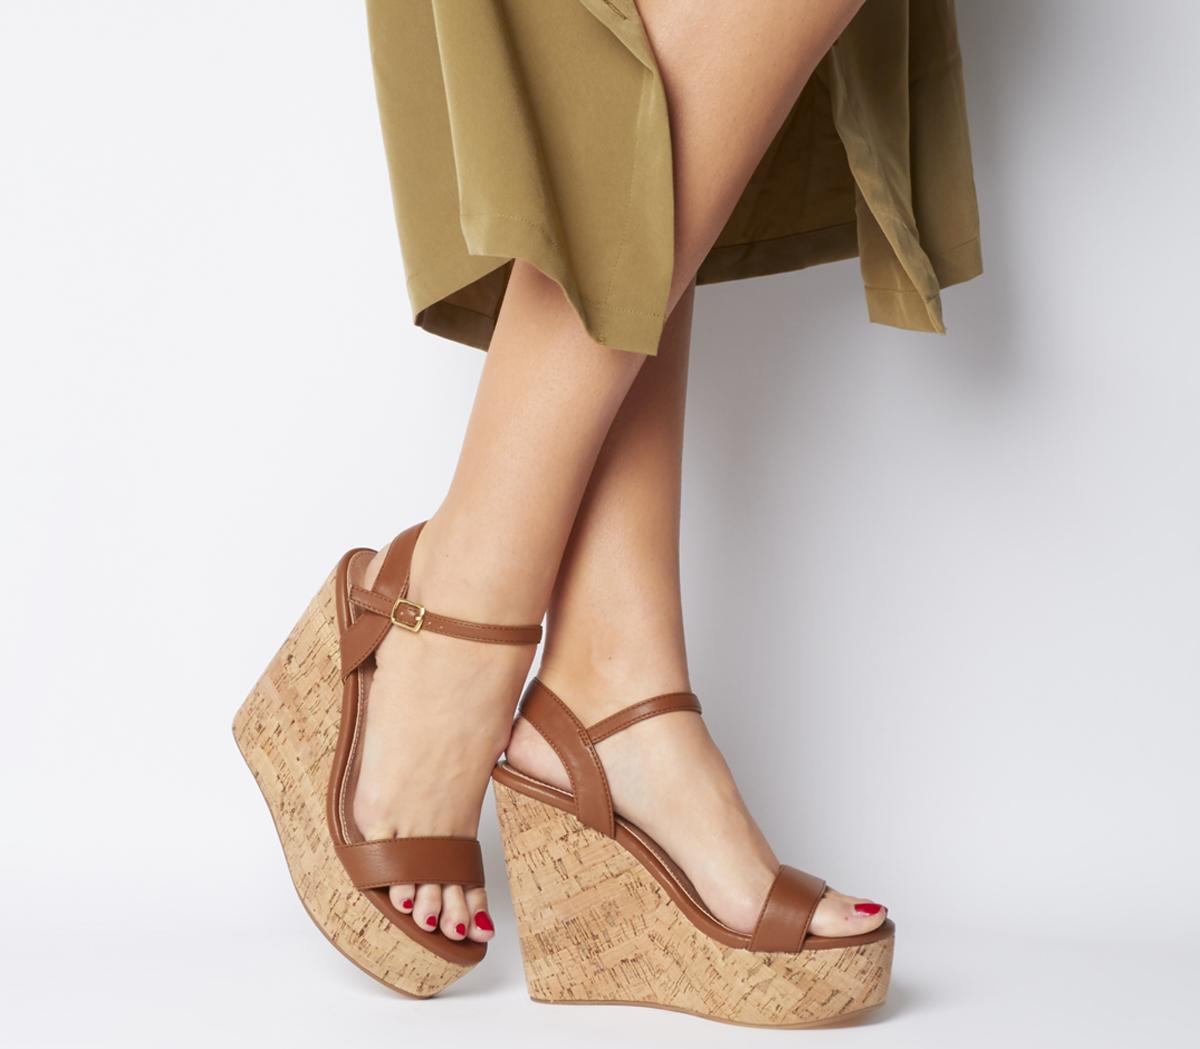 cork wedges shoes